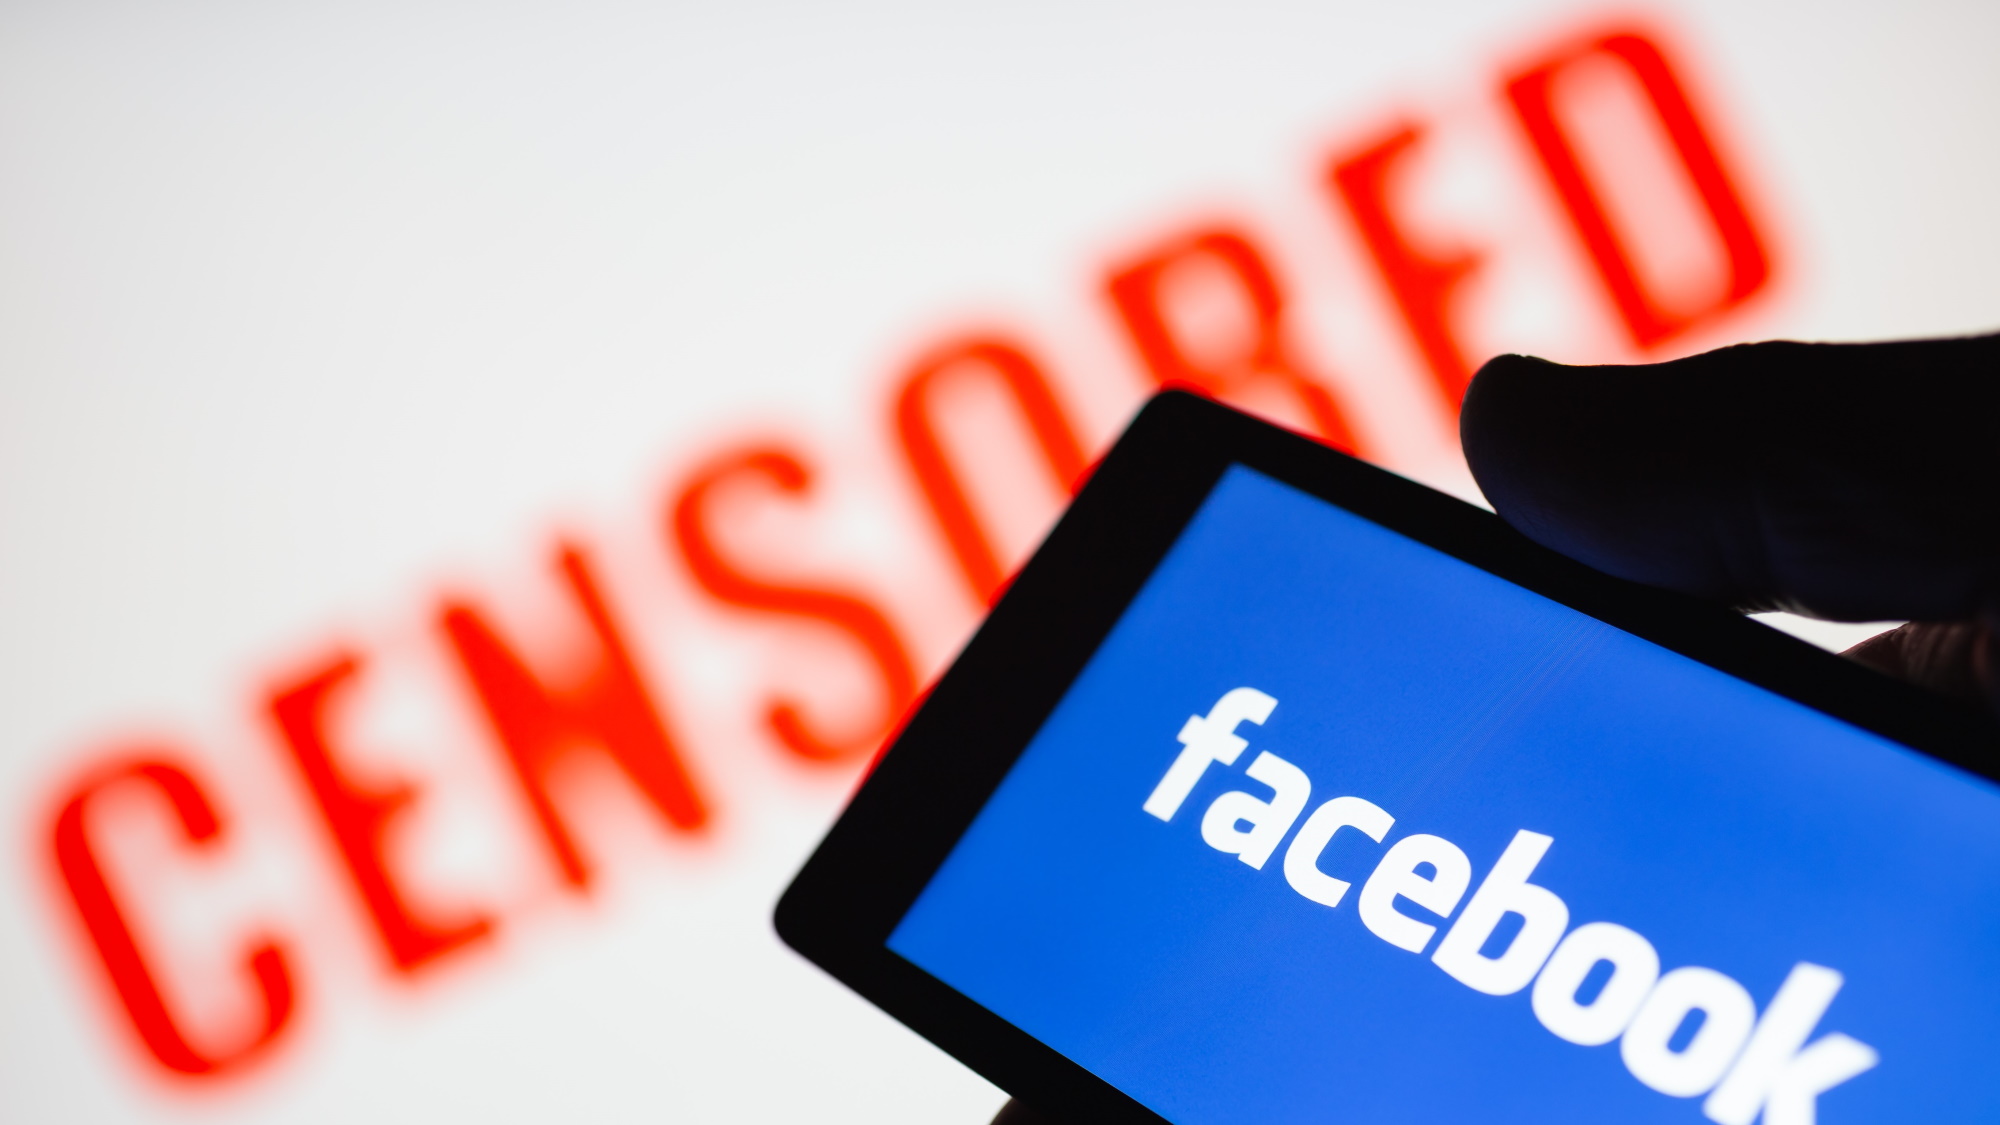 Smartphone in hand displays Facebook logo.  Red censored text blurred on the background